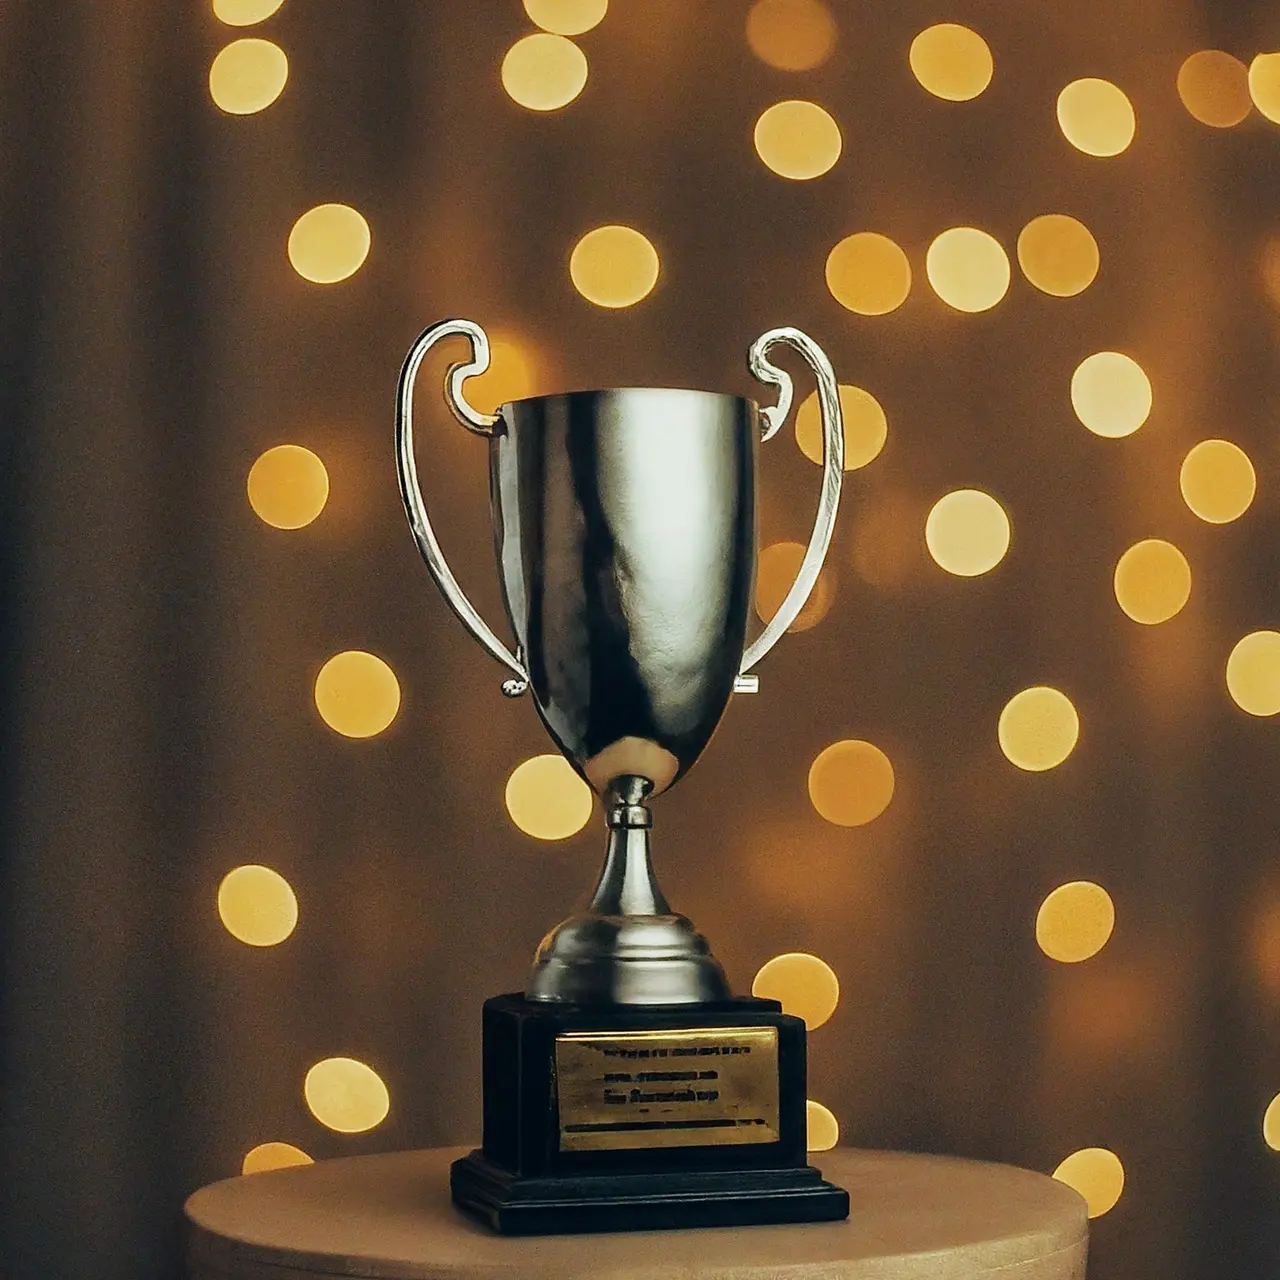 A trophy on a pedestal with shimmering lights in background. 35mm stock photo